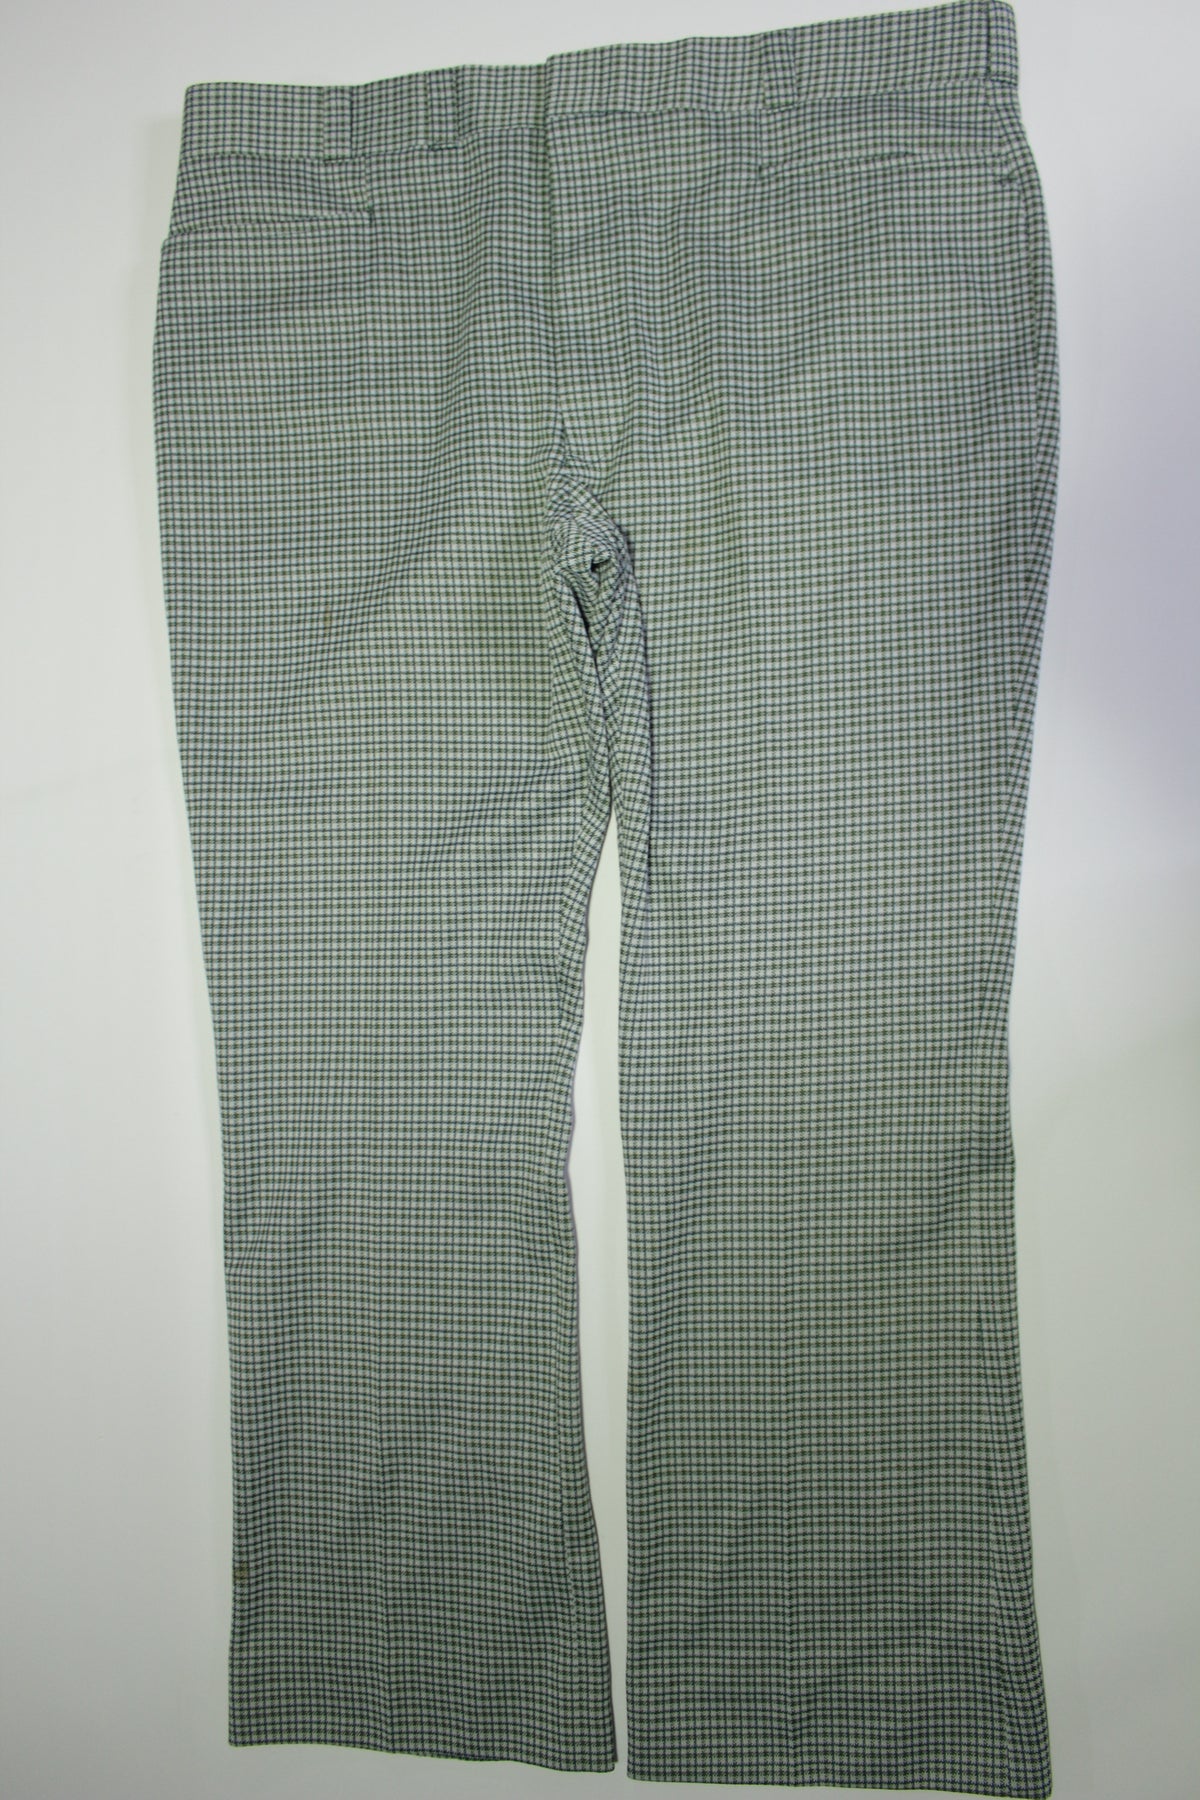 Completely Vintage 70's Polyester Leisure Suit Disco Houndstooth Plaid Pants "Mod"